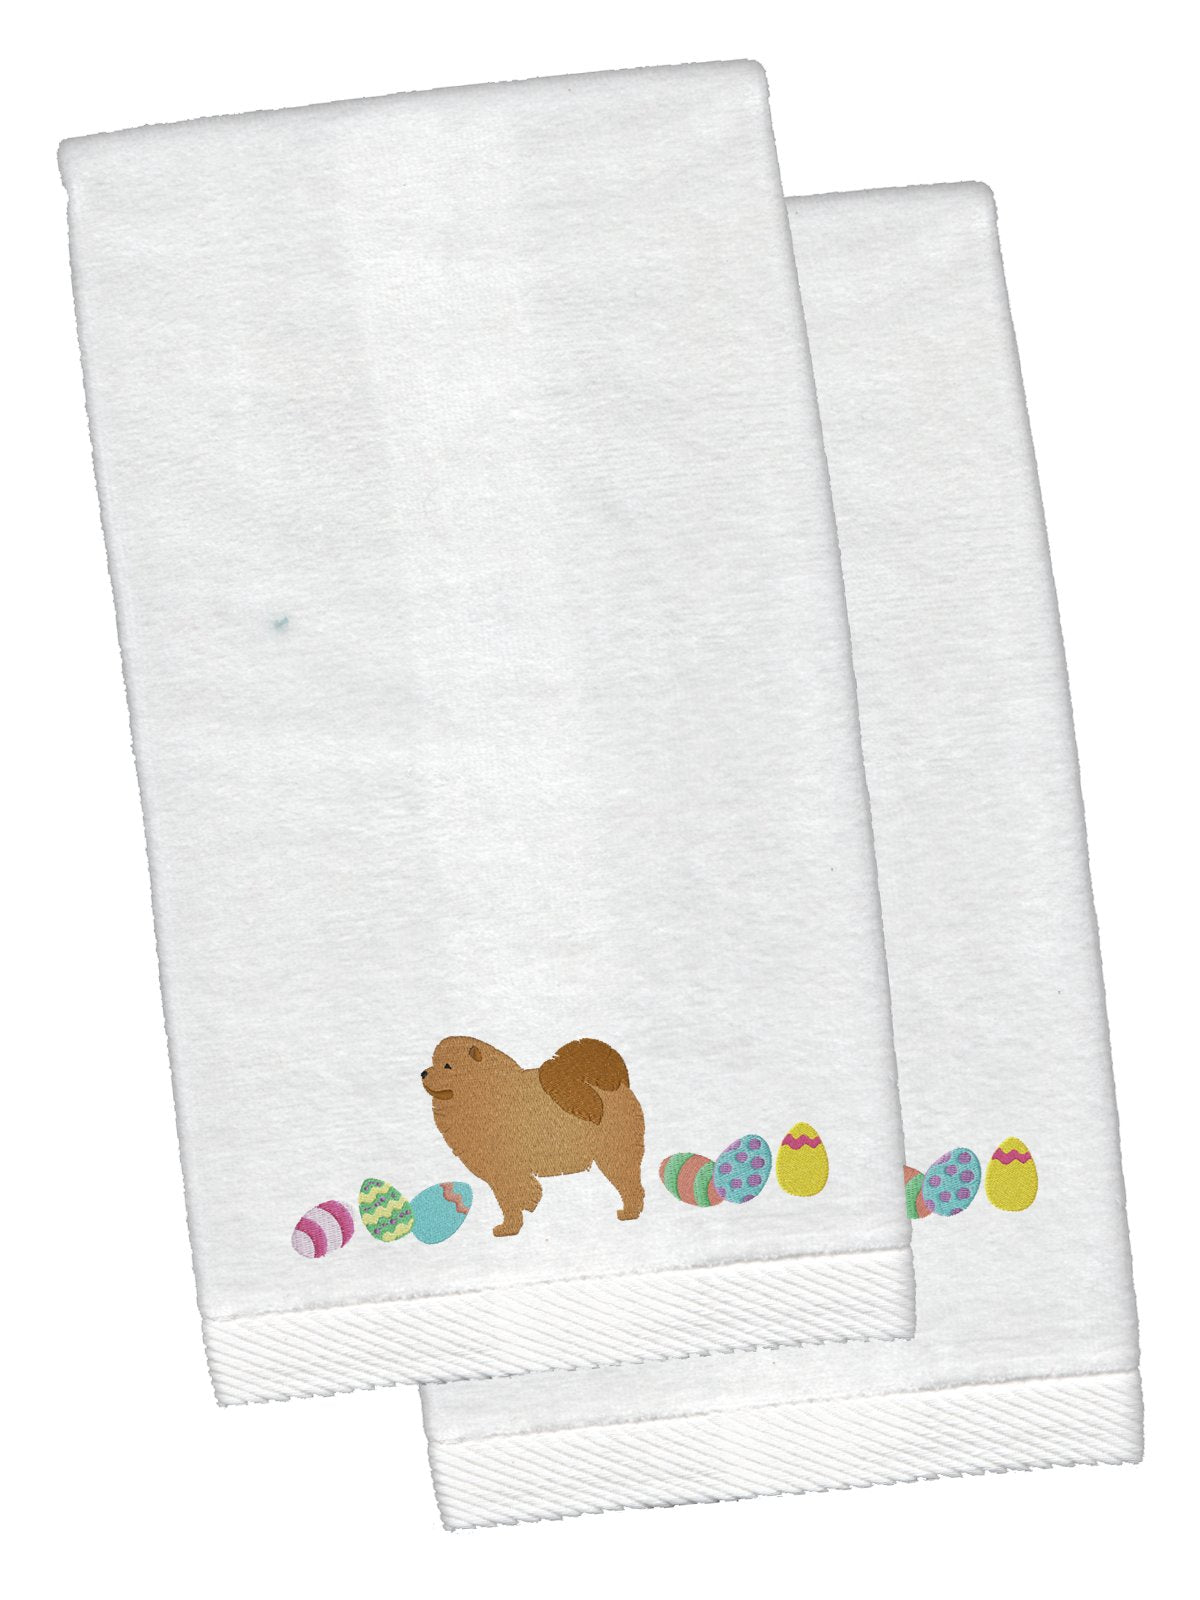 Chow Chow Easter White Embroidered Plush Hand Towel Set of 2 CK1626KTEMB by Caroline's Treasures